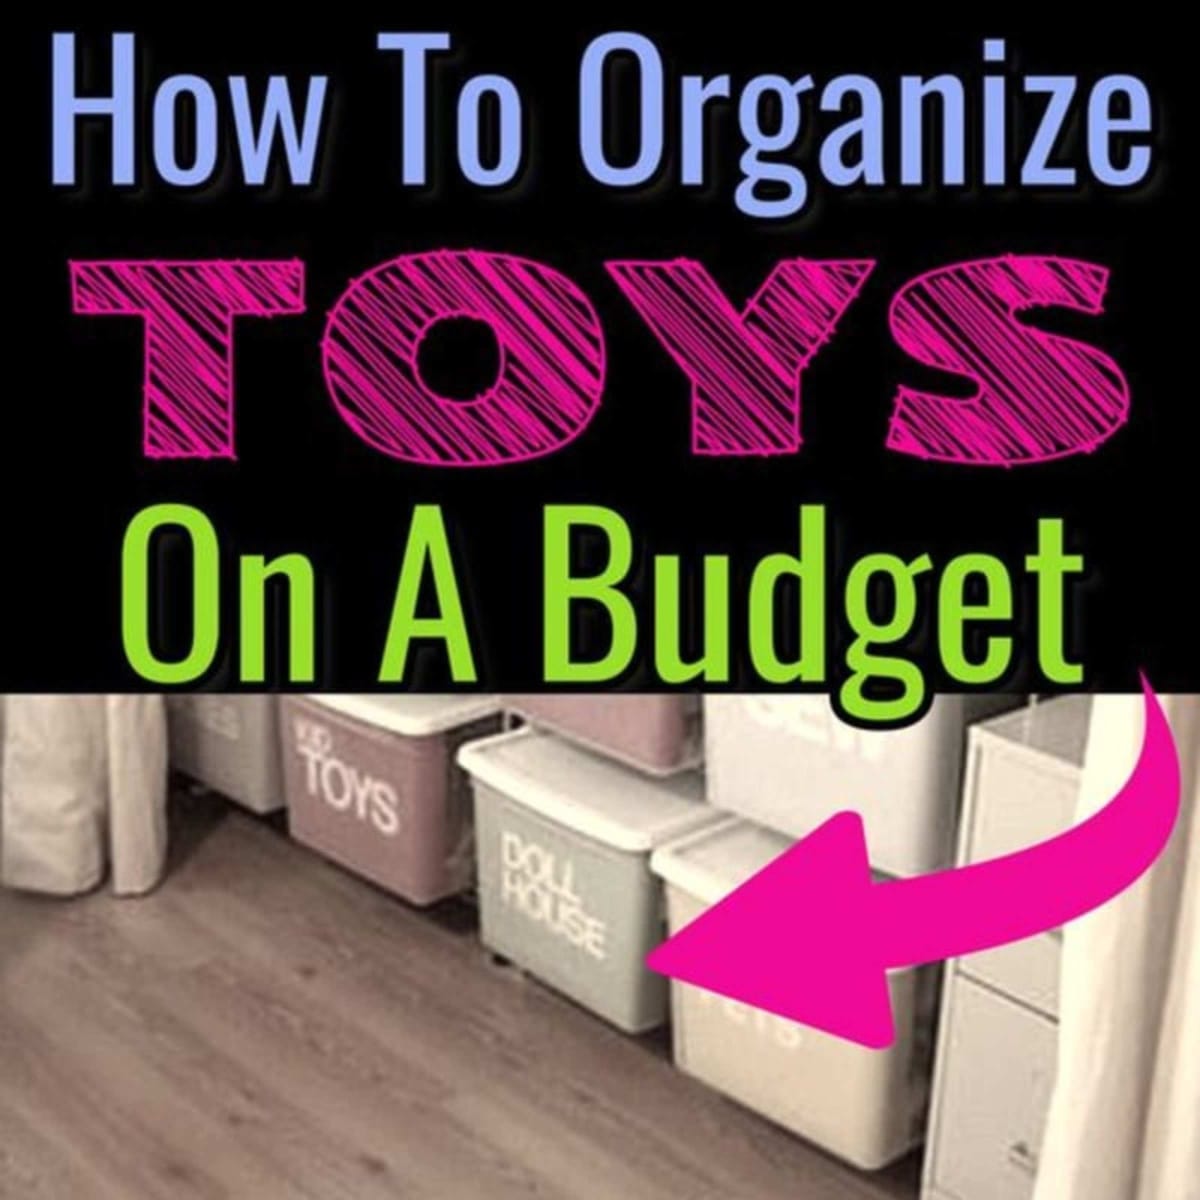 How To Organize Toys On a Budget